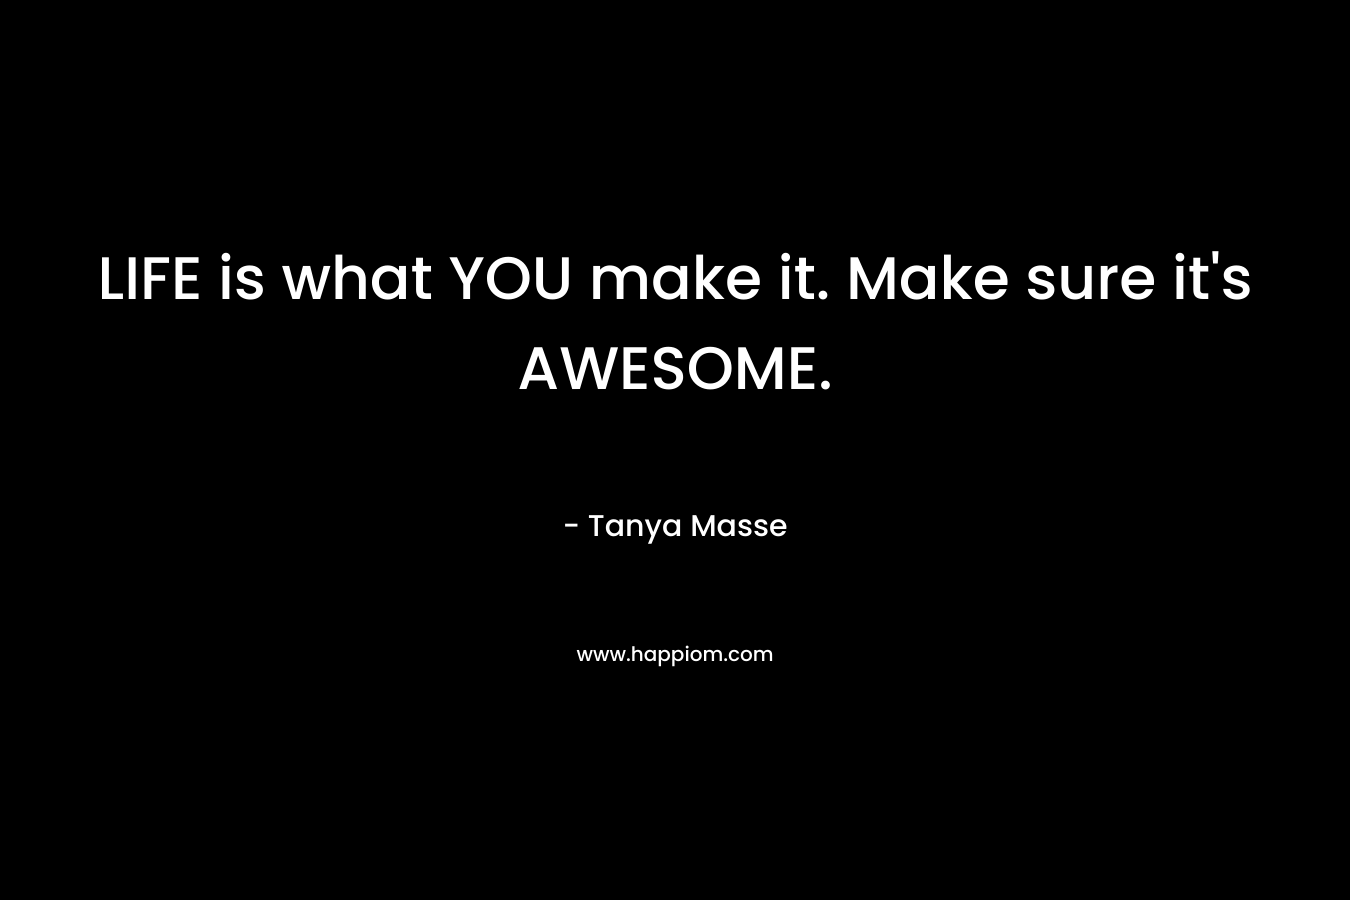 LIFE is what YOU make it. Make sure it's AWESOME.